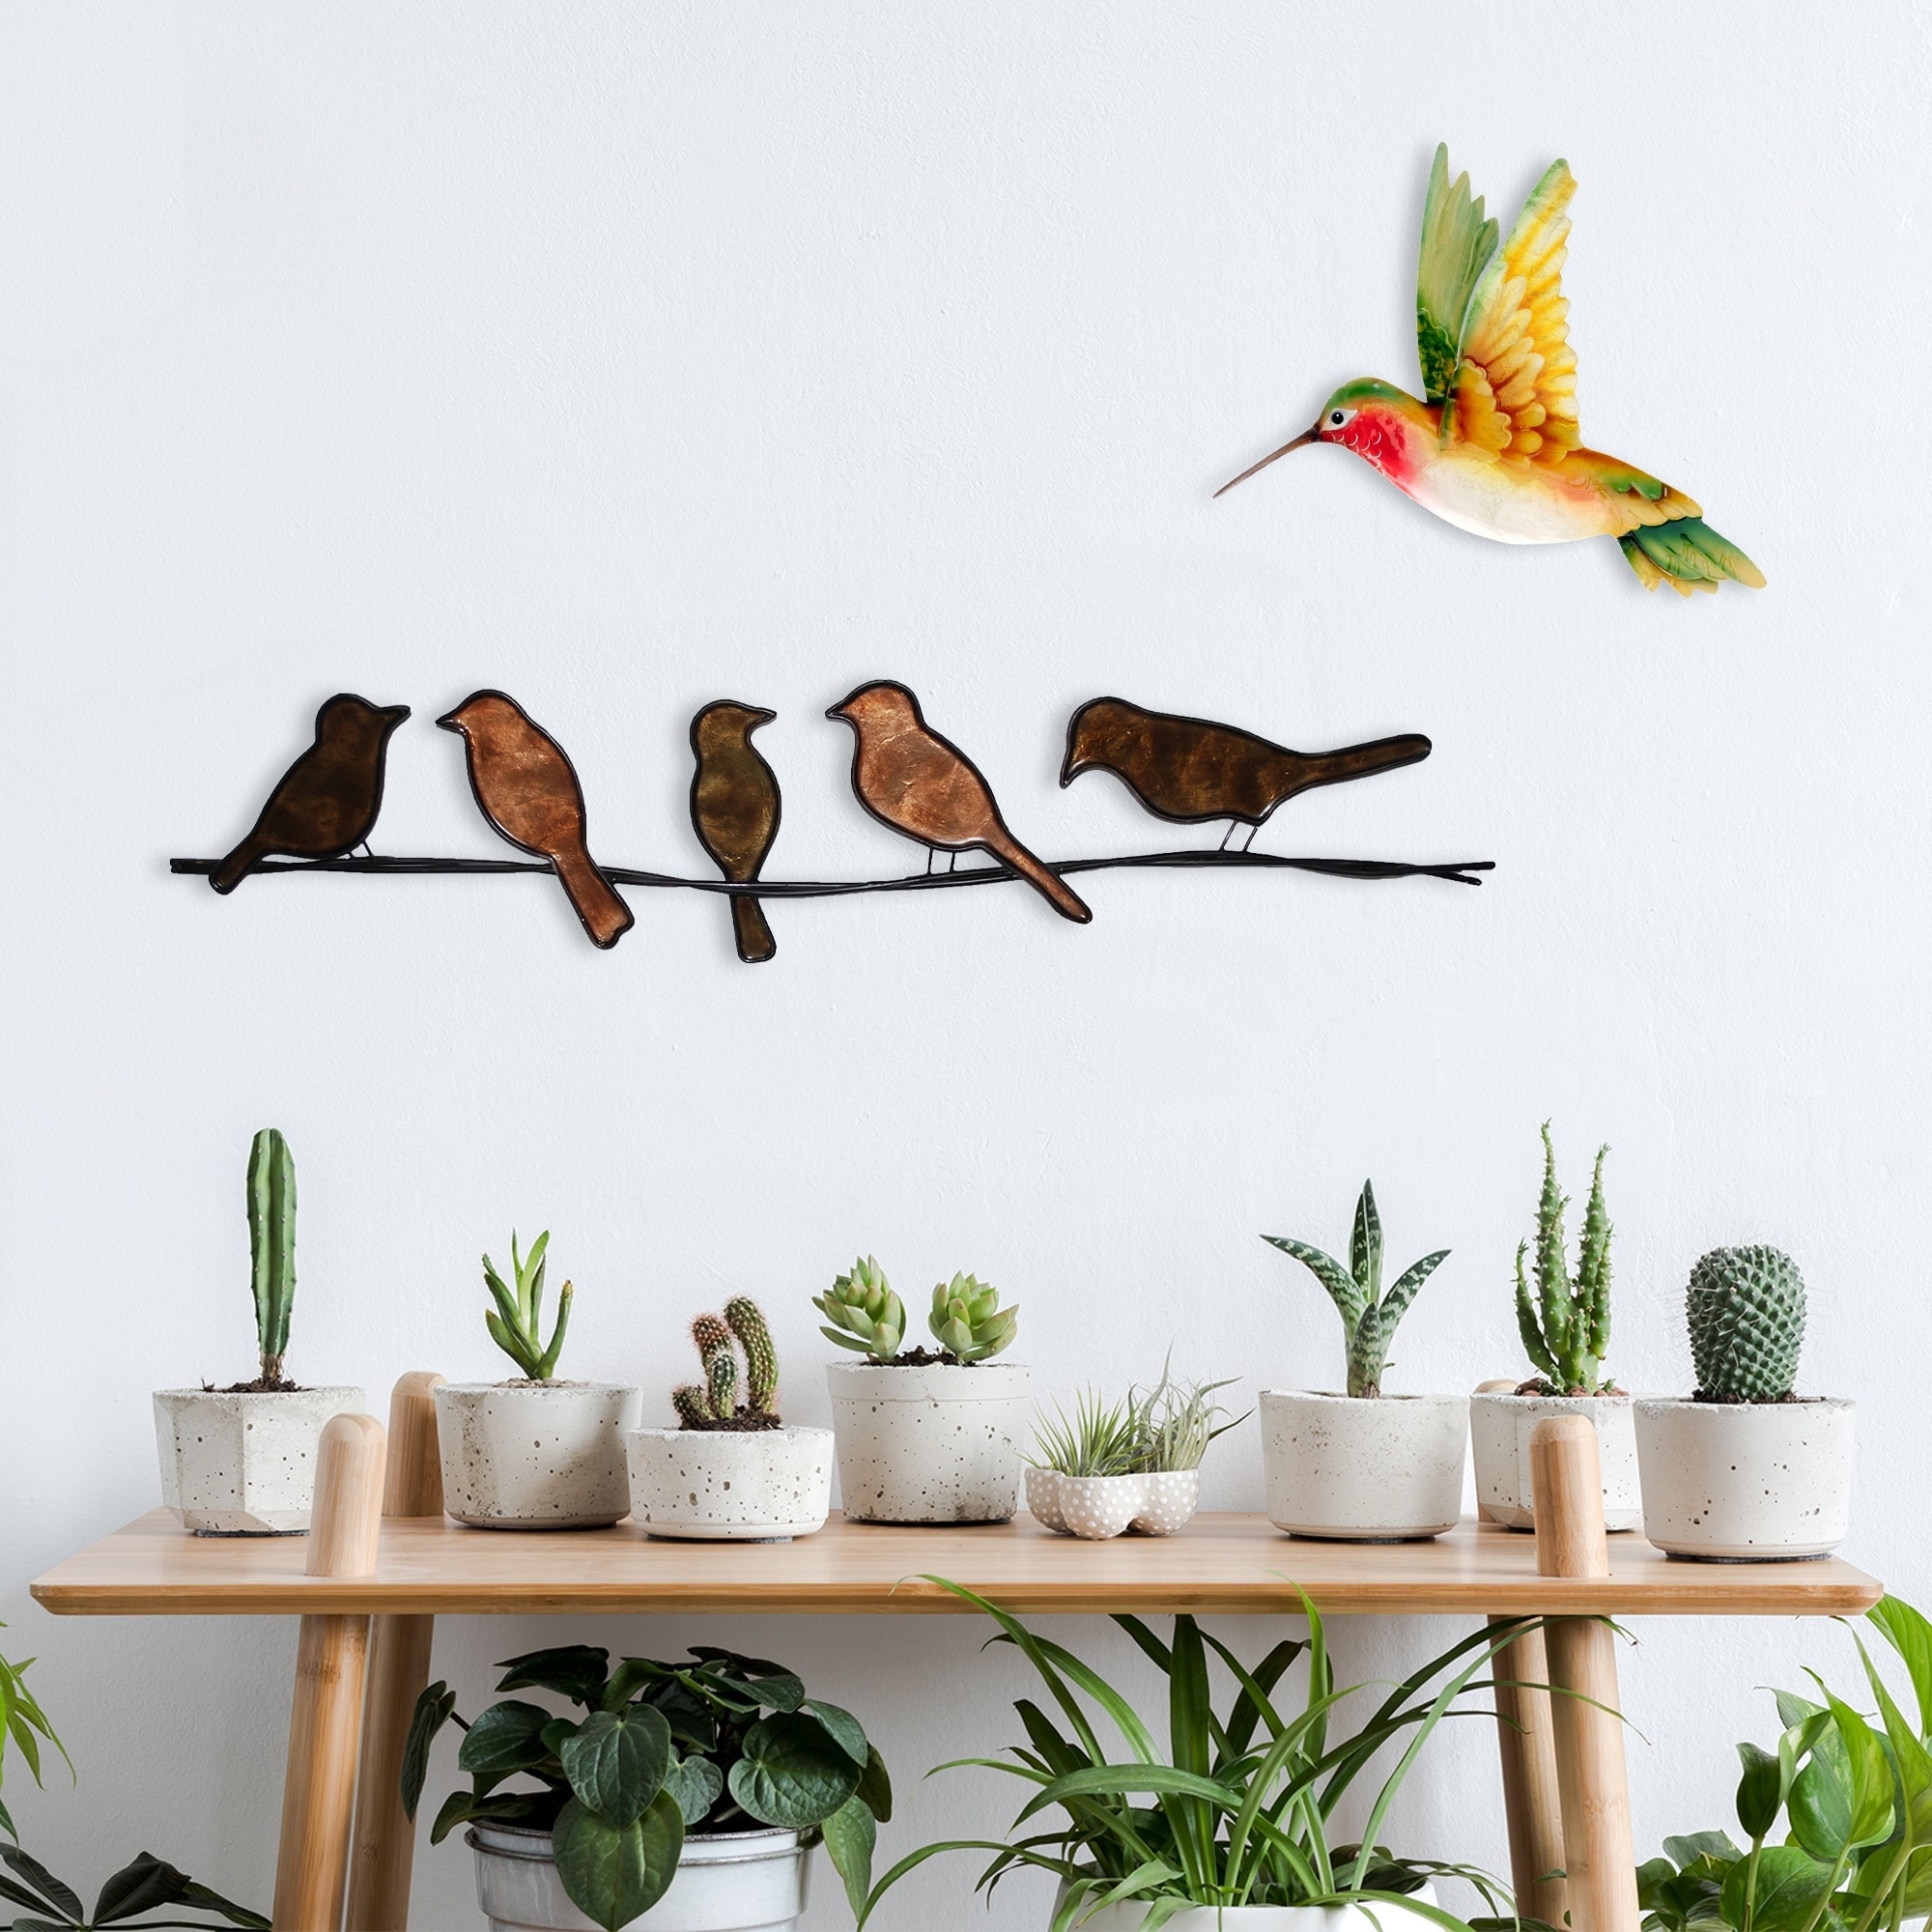 Birds On A Wire - 1 x 28.5 x 6 - On Sale - Bed Bath & Beyond - 18801959